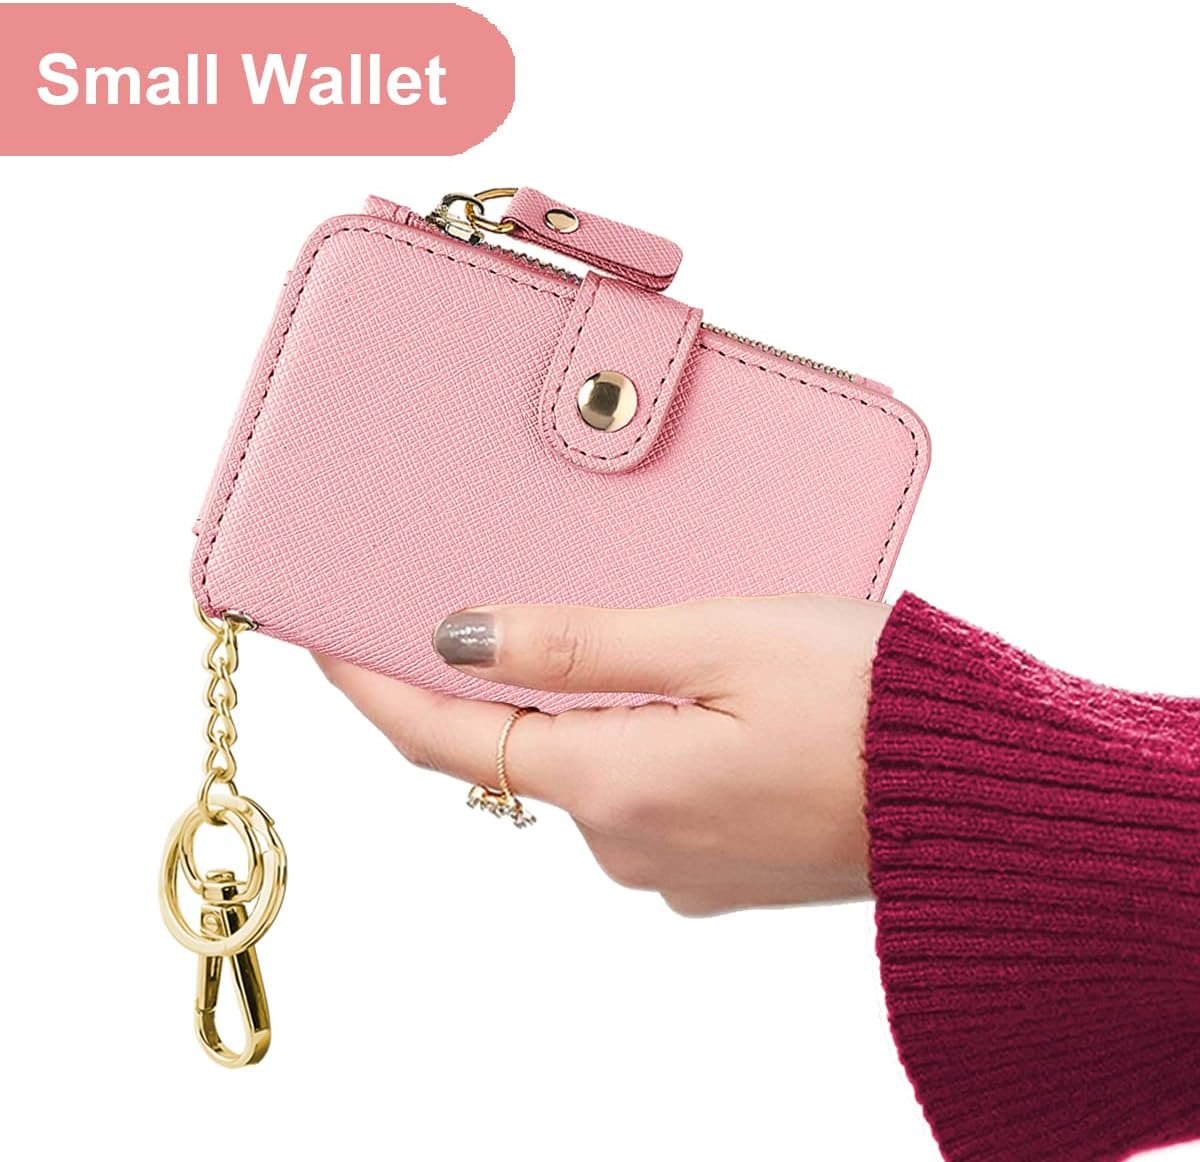 Keychain Wallet with ID Window Review